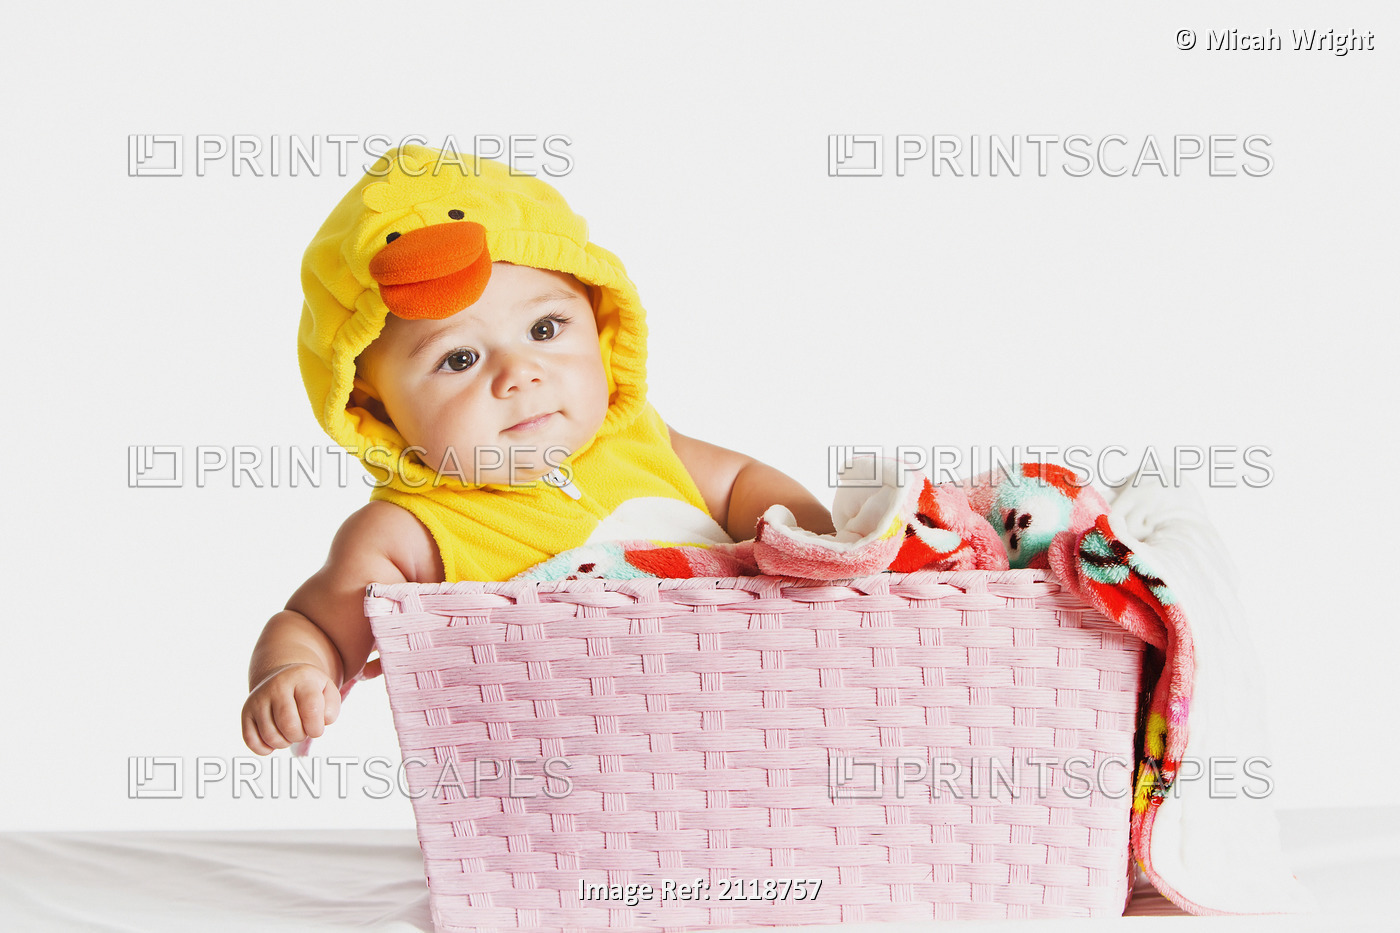 A Six-Month-Old Girl In A Duck Halloween Costume; Fountain Valley California Usa